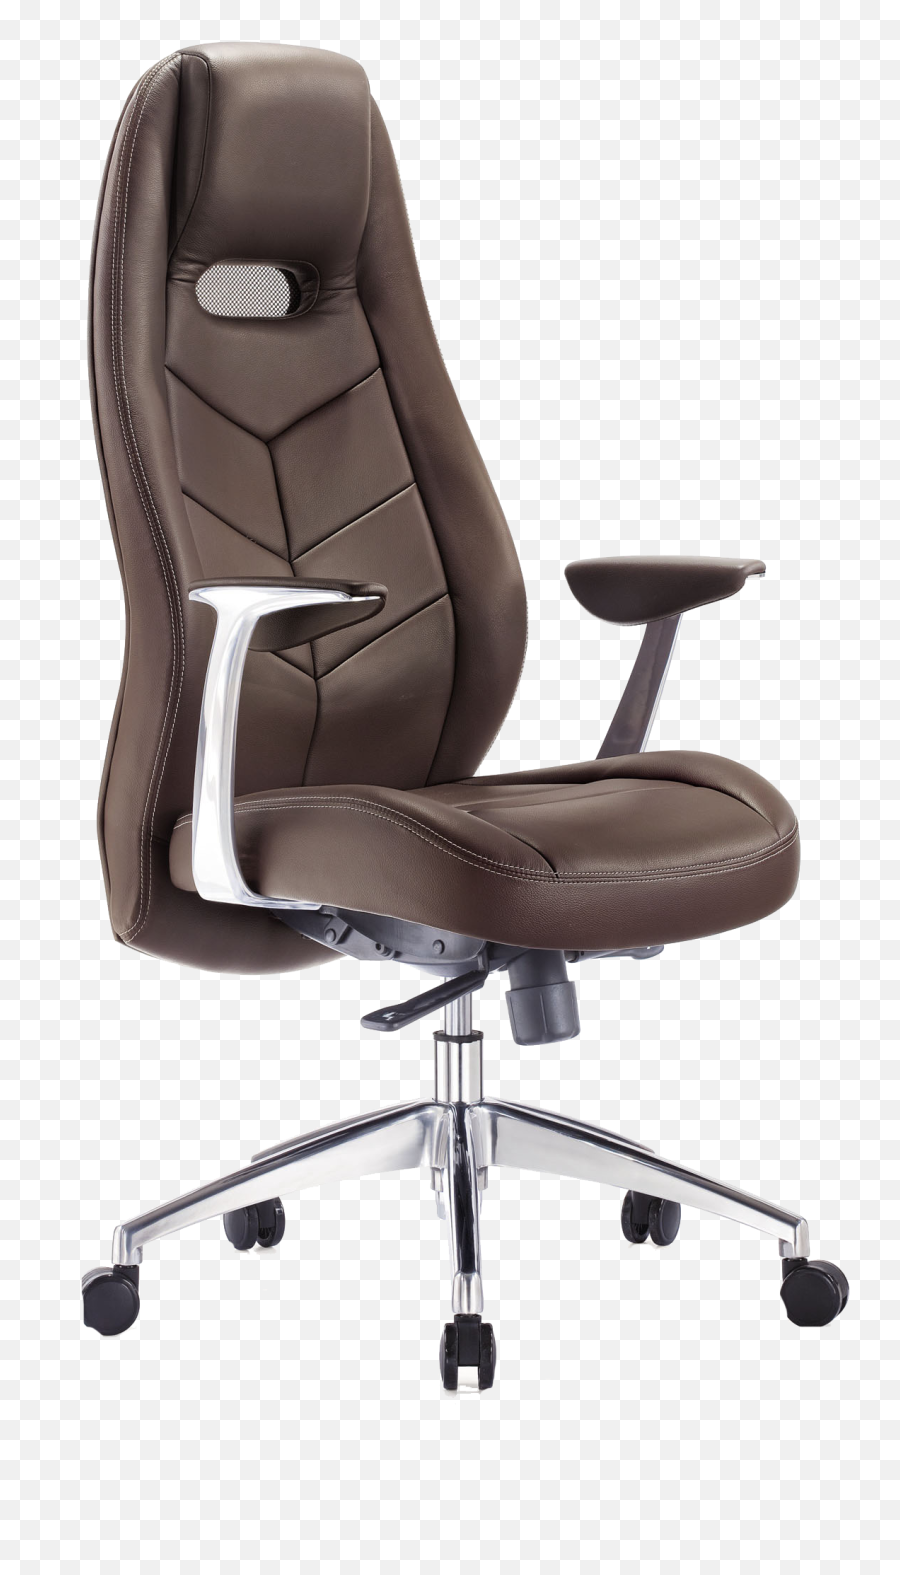 Office Chair Transparent Background - Office Furniture Chair Png Emoji,Chair Transparent Background